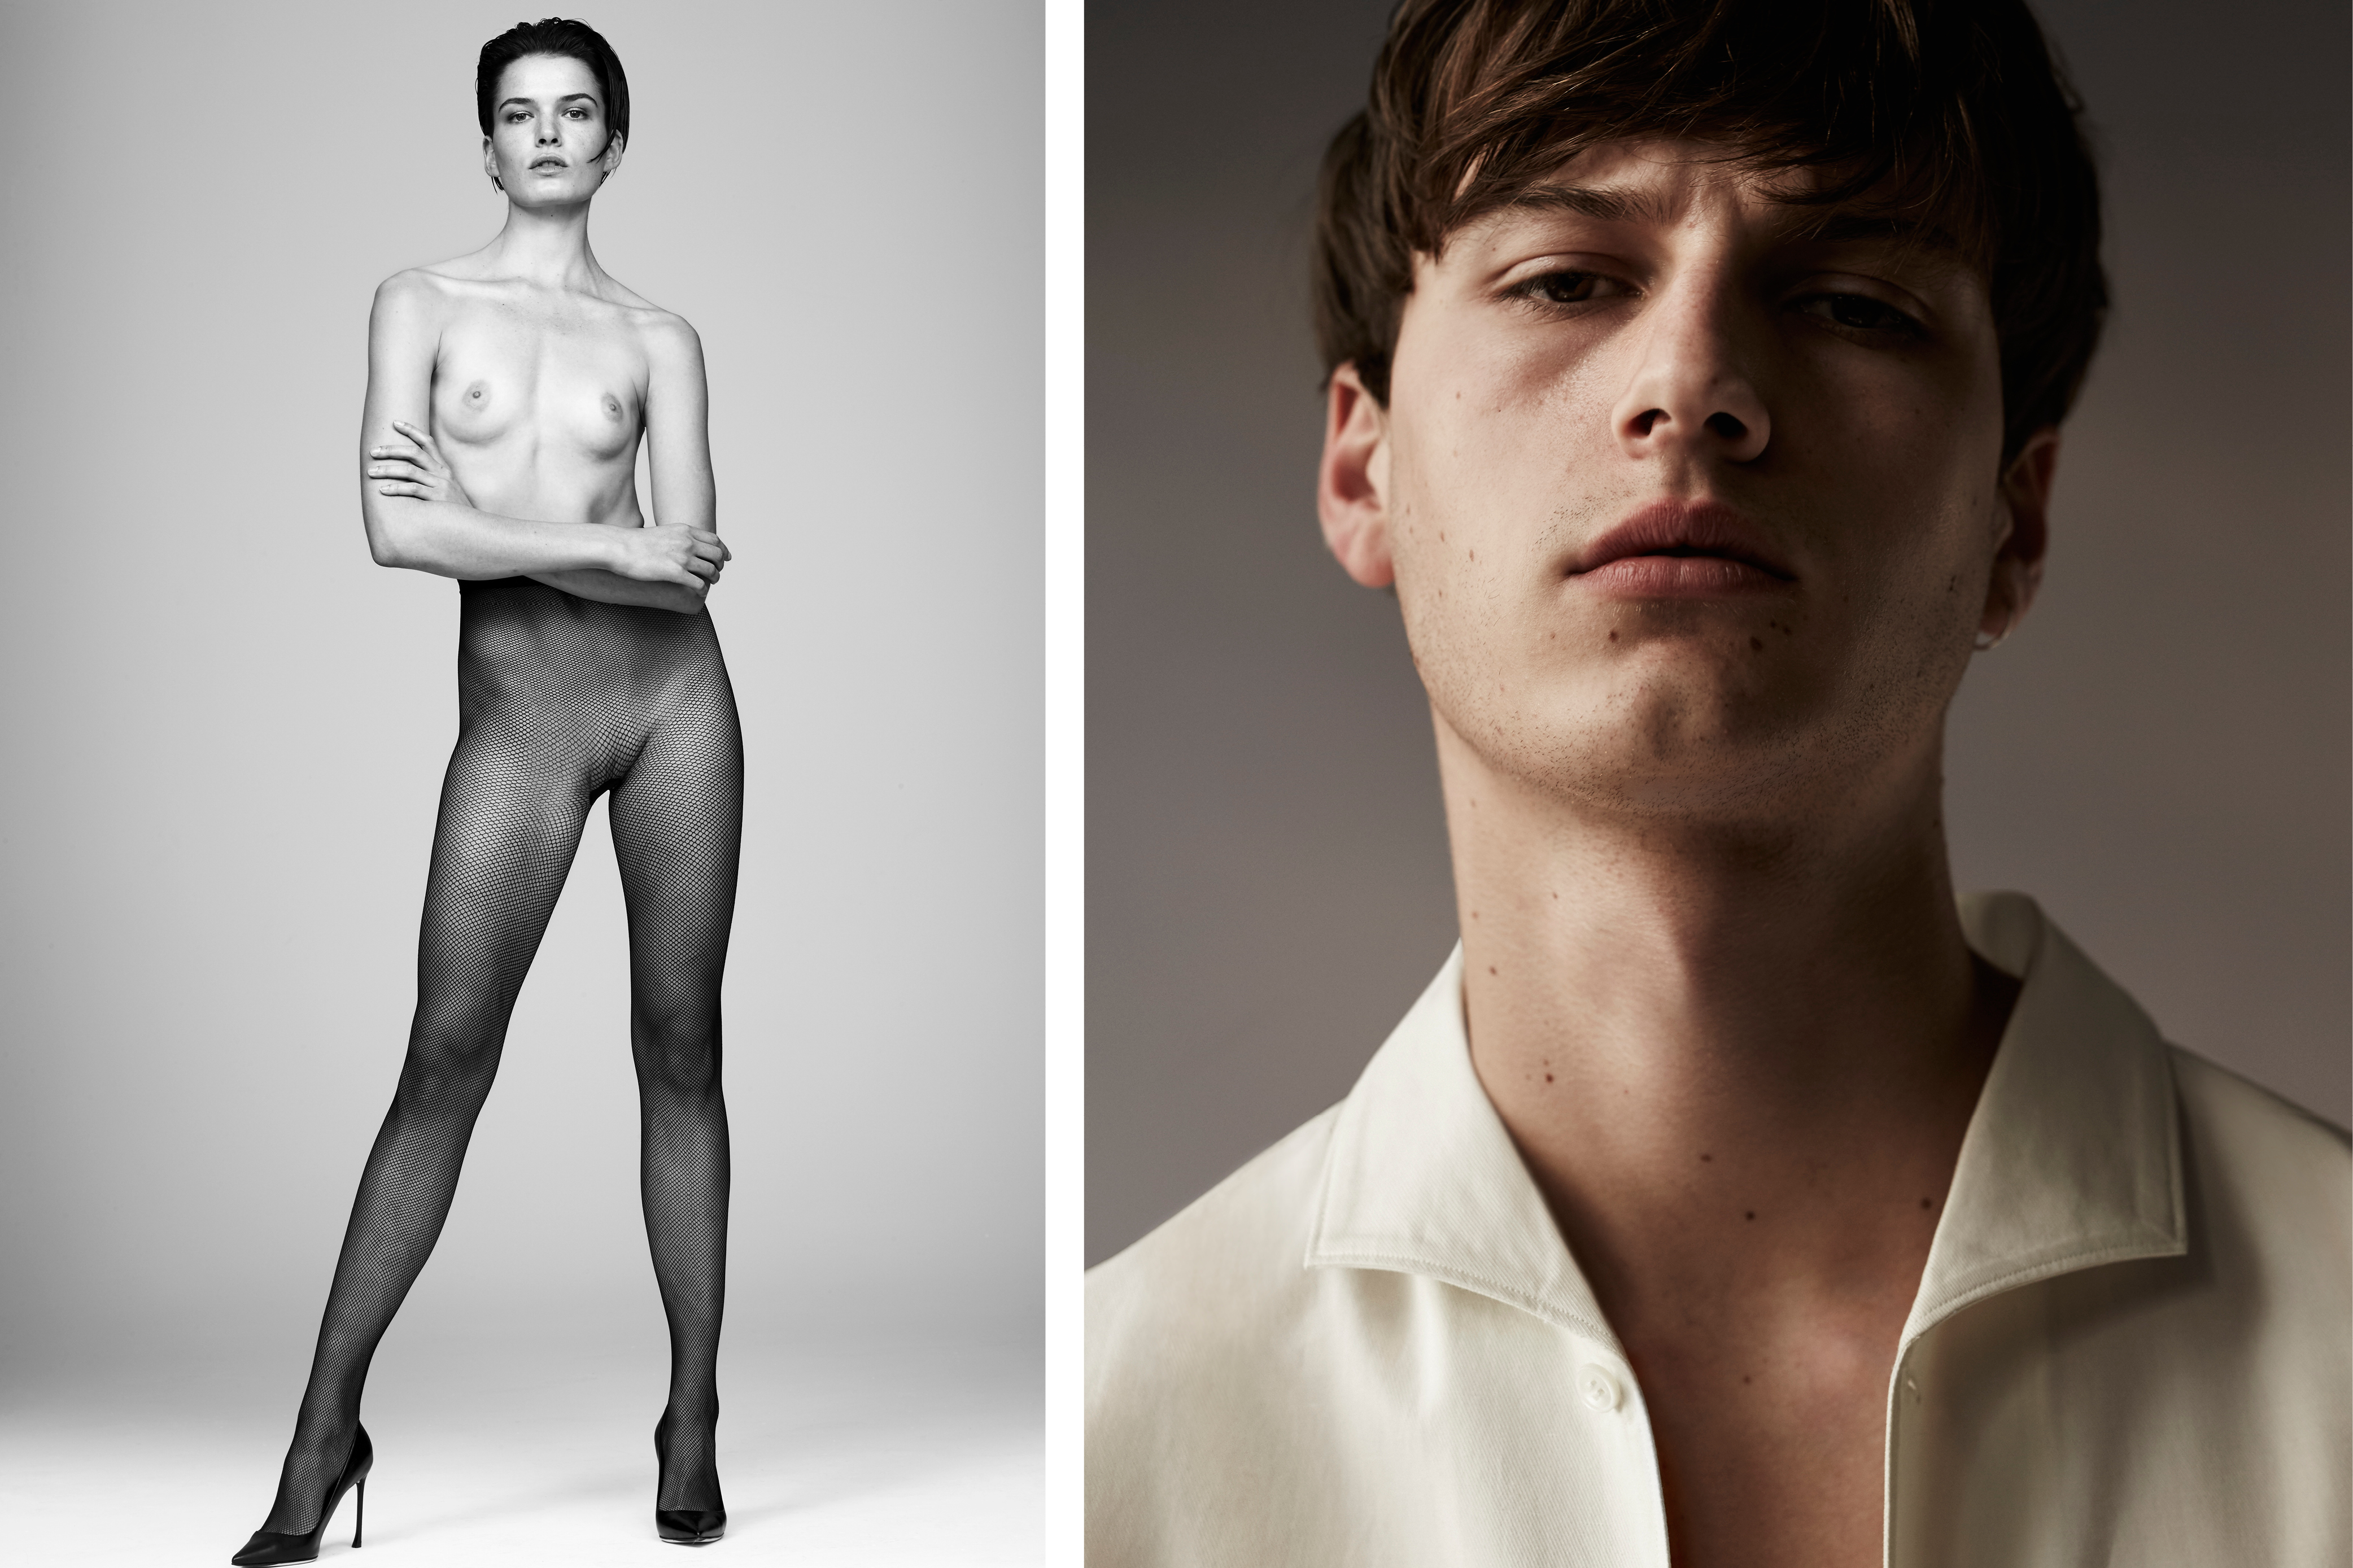 Left: Anne Verhallen wears tights by Wolford. Shoes by Christian Dior.Right: Le Sueur wears shirt by Lemaire.